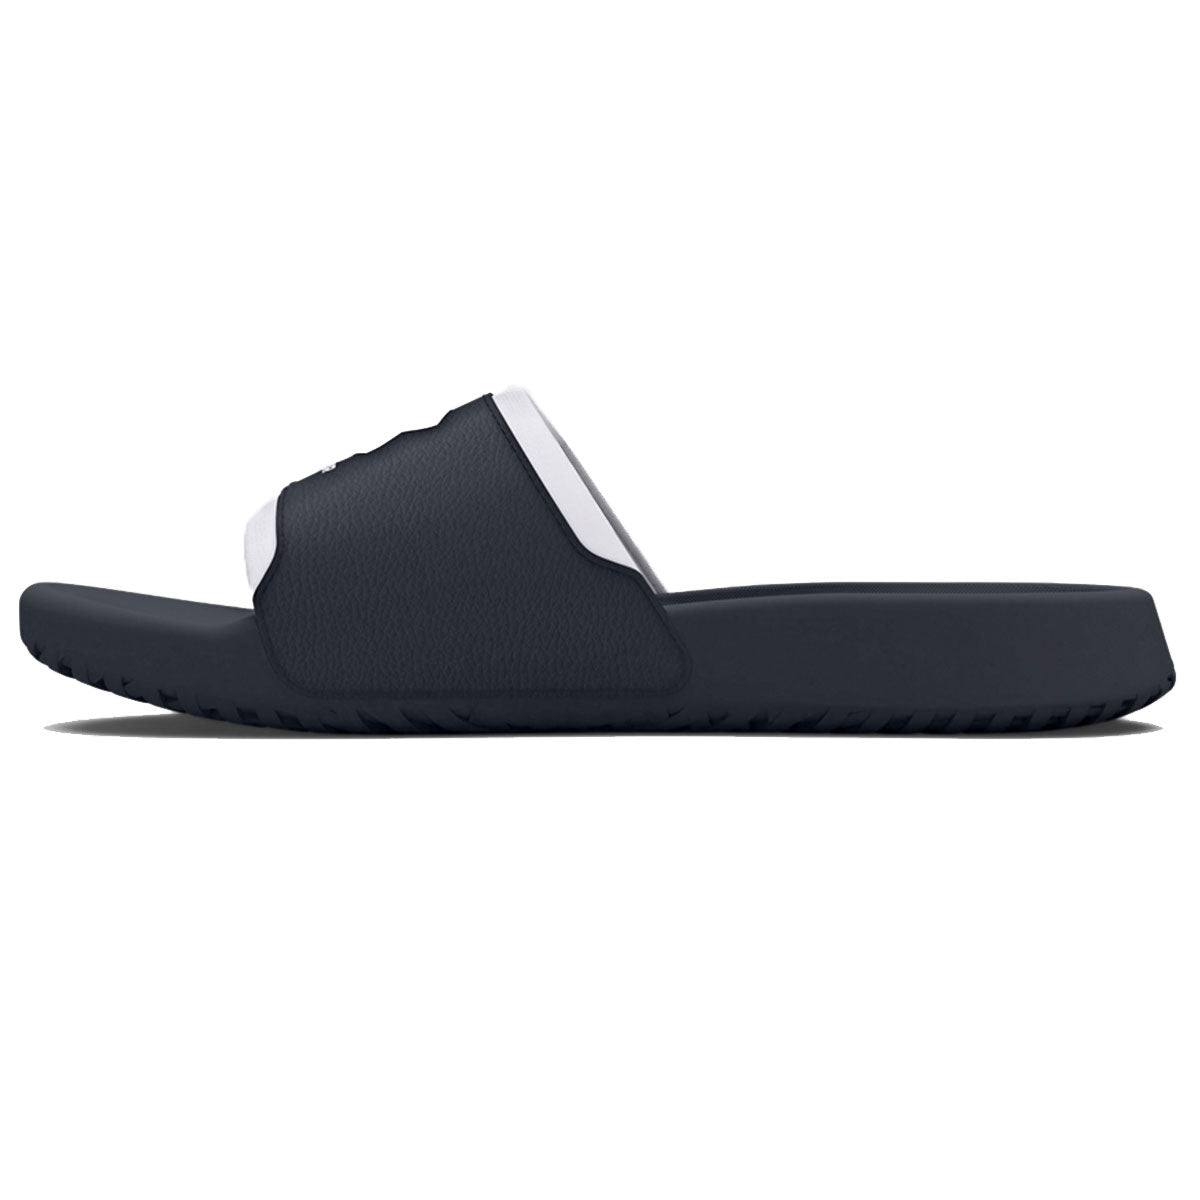 Under Armour Ignite Select Sliders - Adult - Black/White